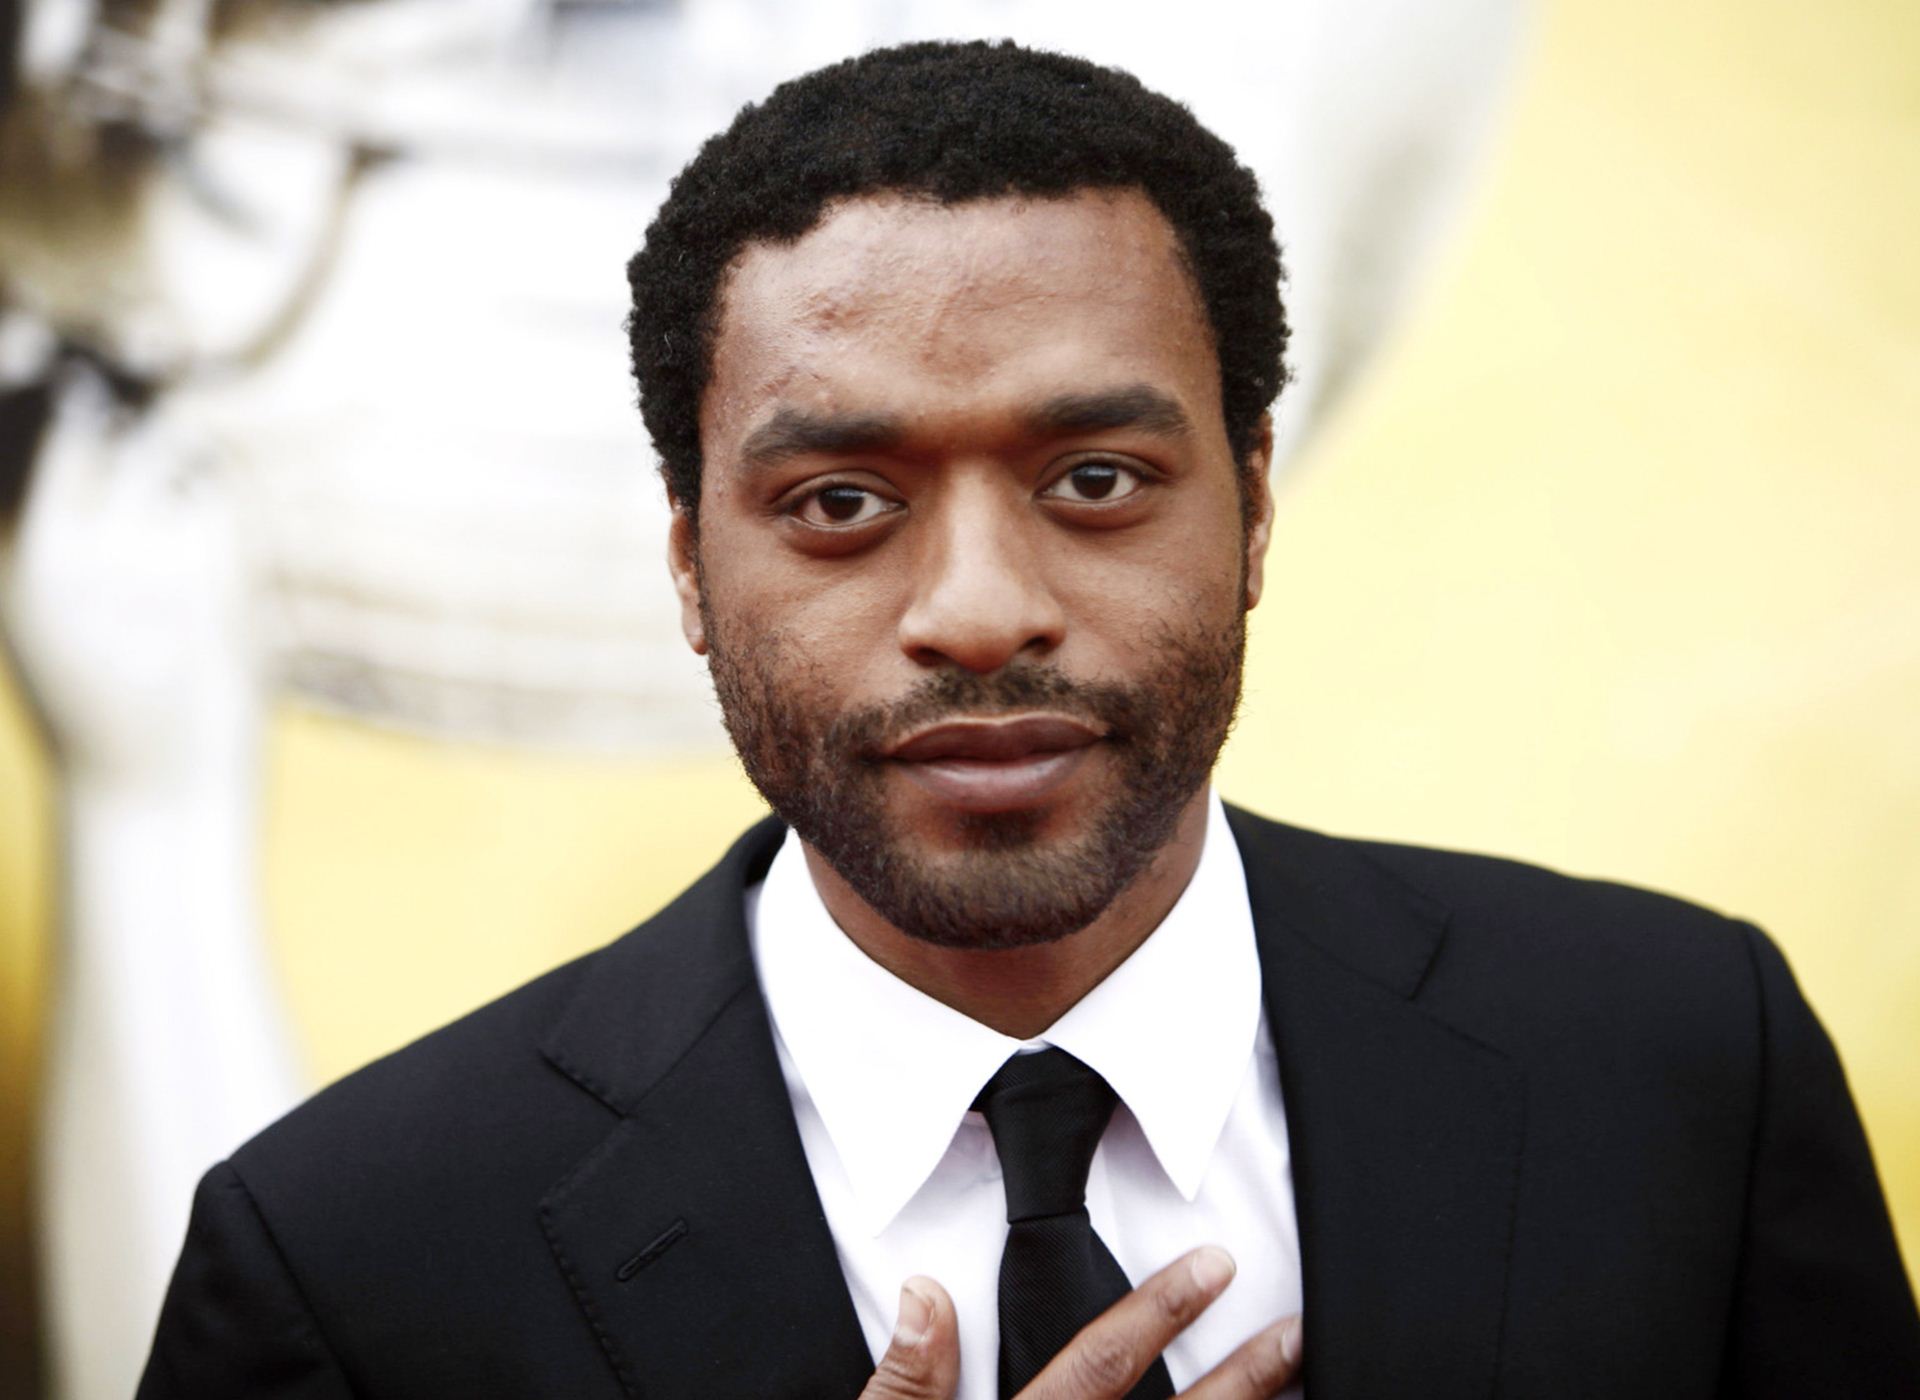 Chiwetel Ejiofor arrives at the 41st NAACP Image Awards on Friday, Feb. 26, 2010, in Los Angeles. (AP Photo/Matt Sayles)